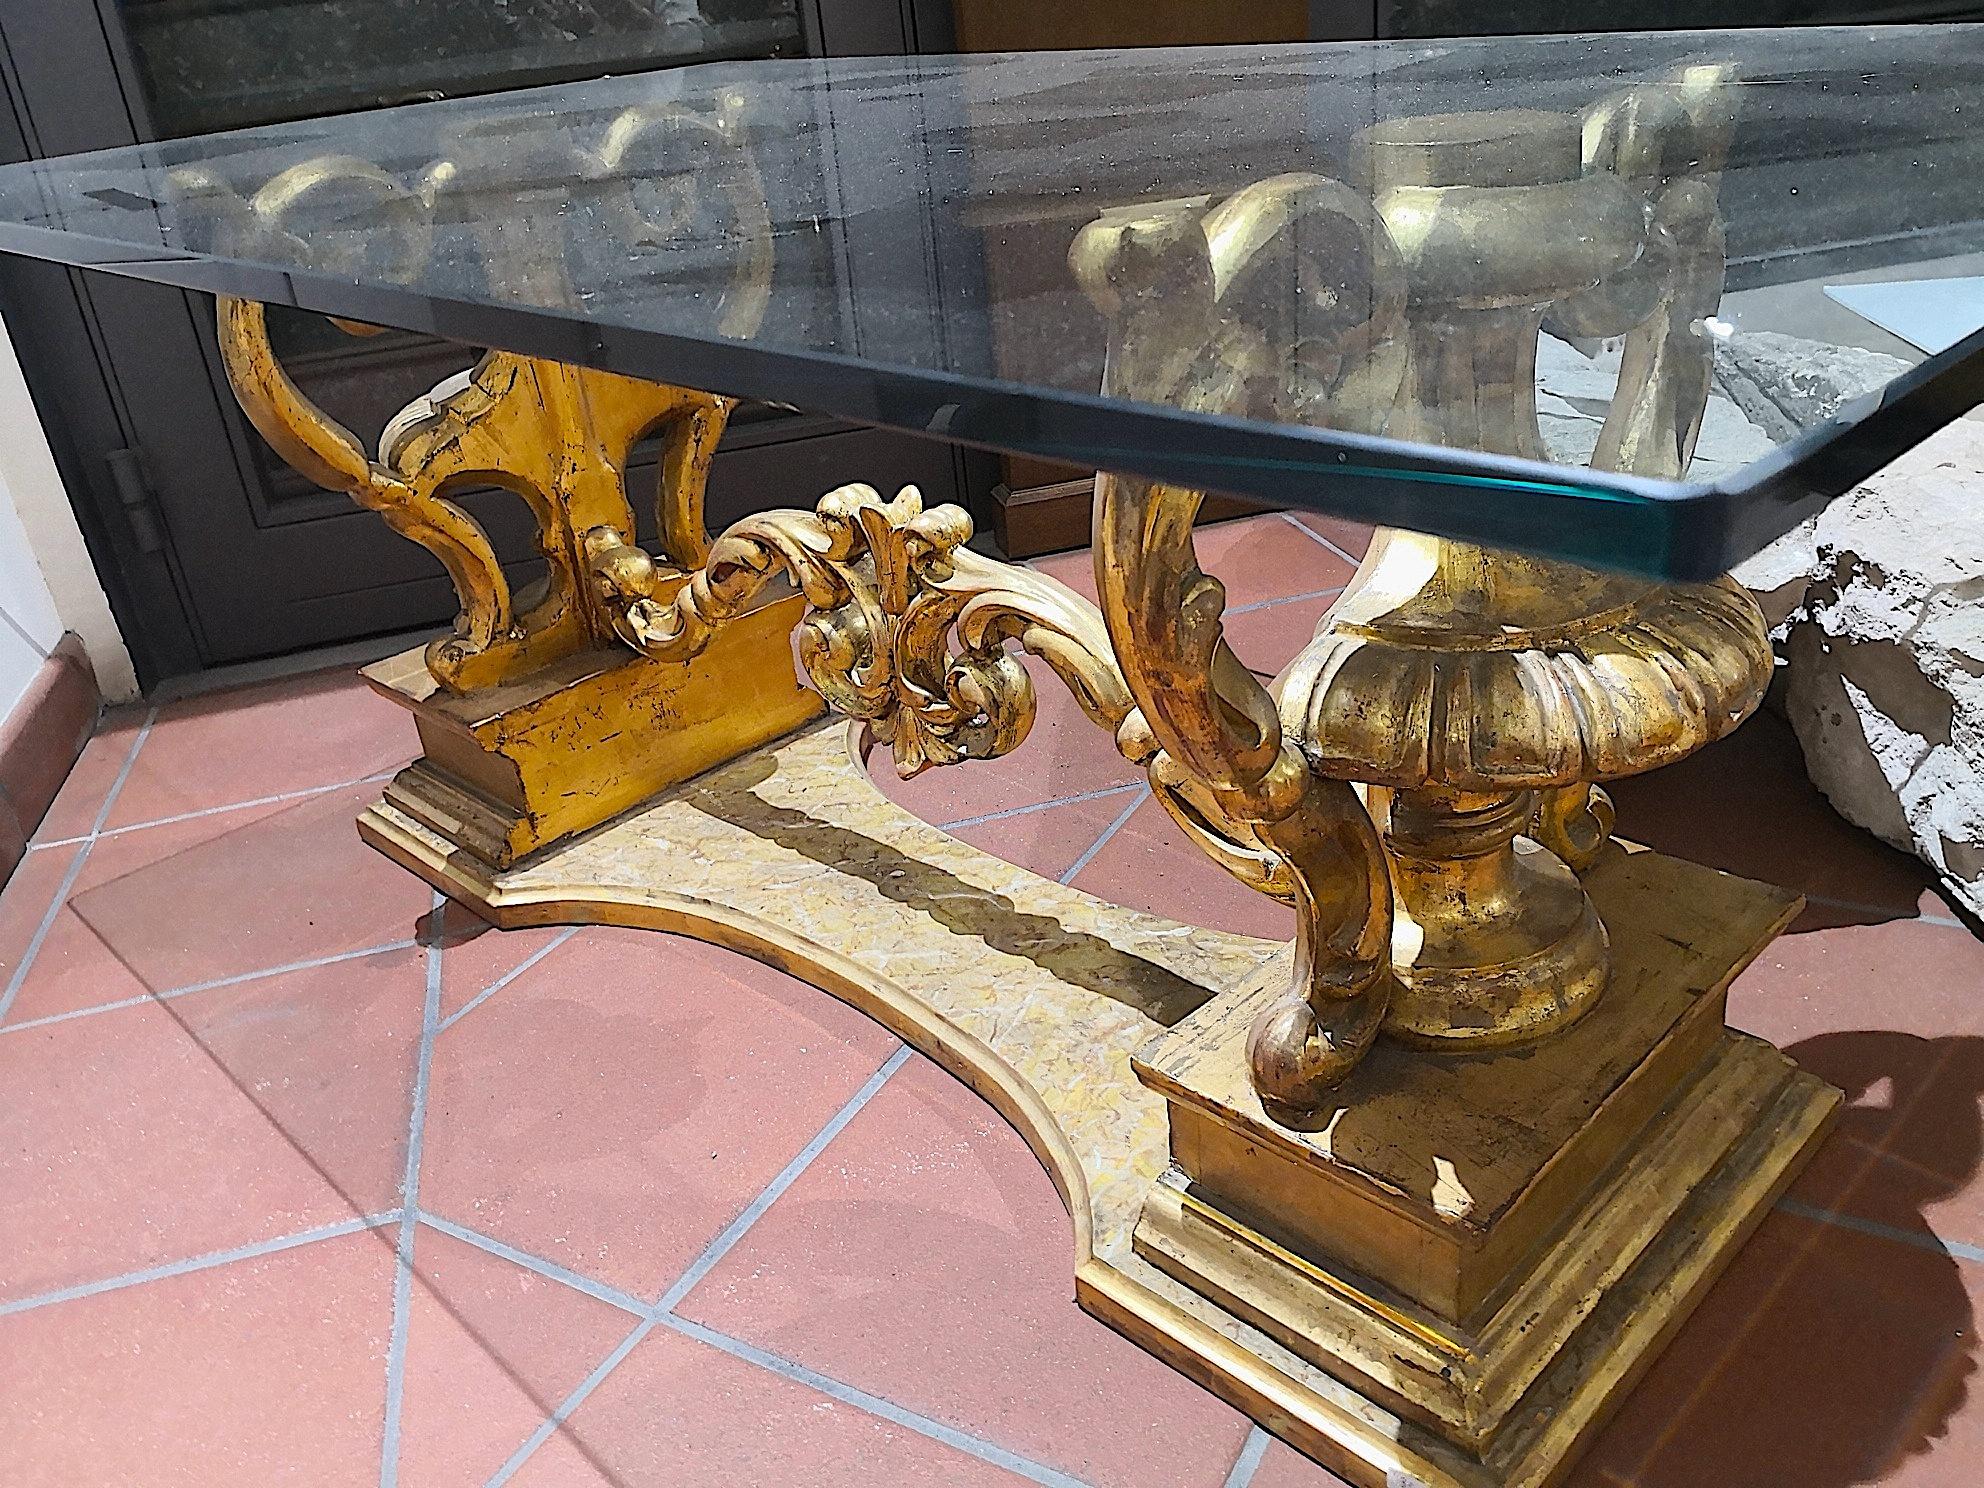 A beautiful and custom made glass top coffee table from antique late 18th century Sicilian giltwood ornaments in the Louis XVI manner. The vase or urn ornaments are antique 18th century, circa 1770. These are carved wood and gold gilt. The bottom